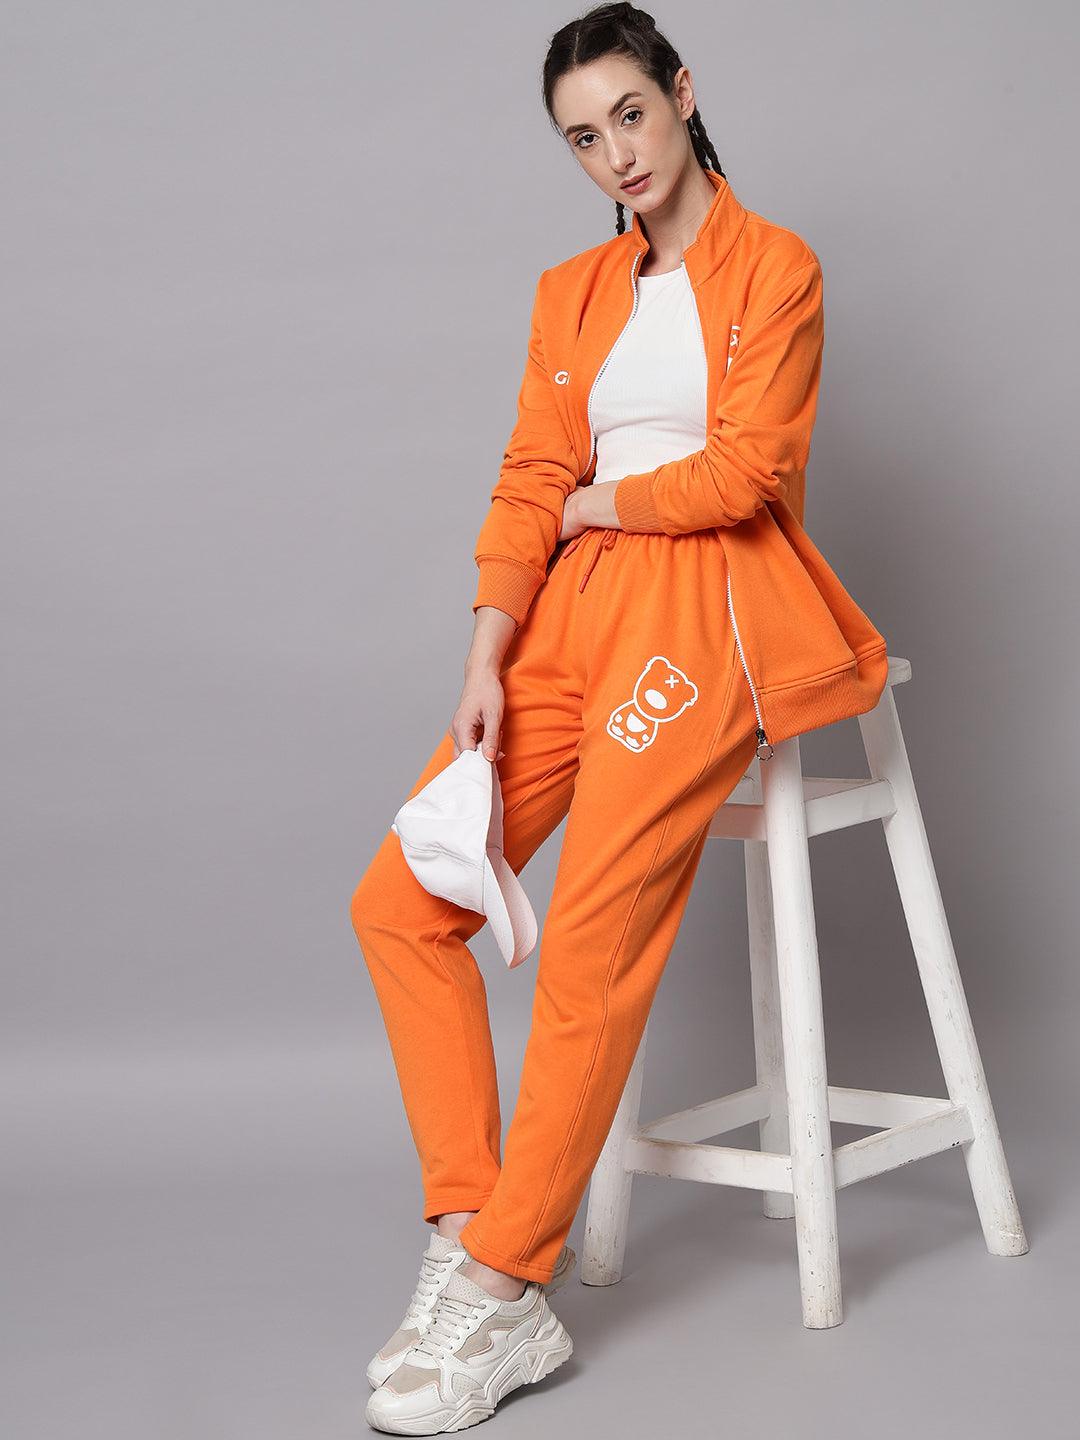 Griffel Women’s Front Logo Color Printed Orange Trackpant - griffel